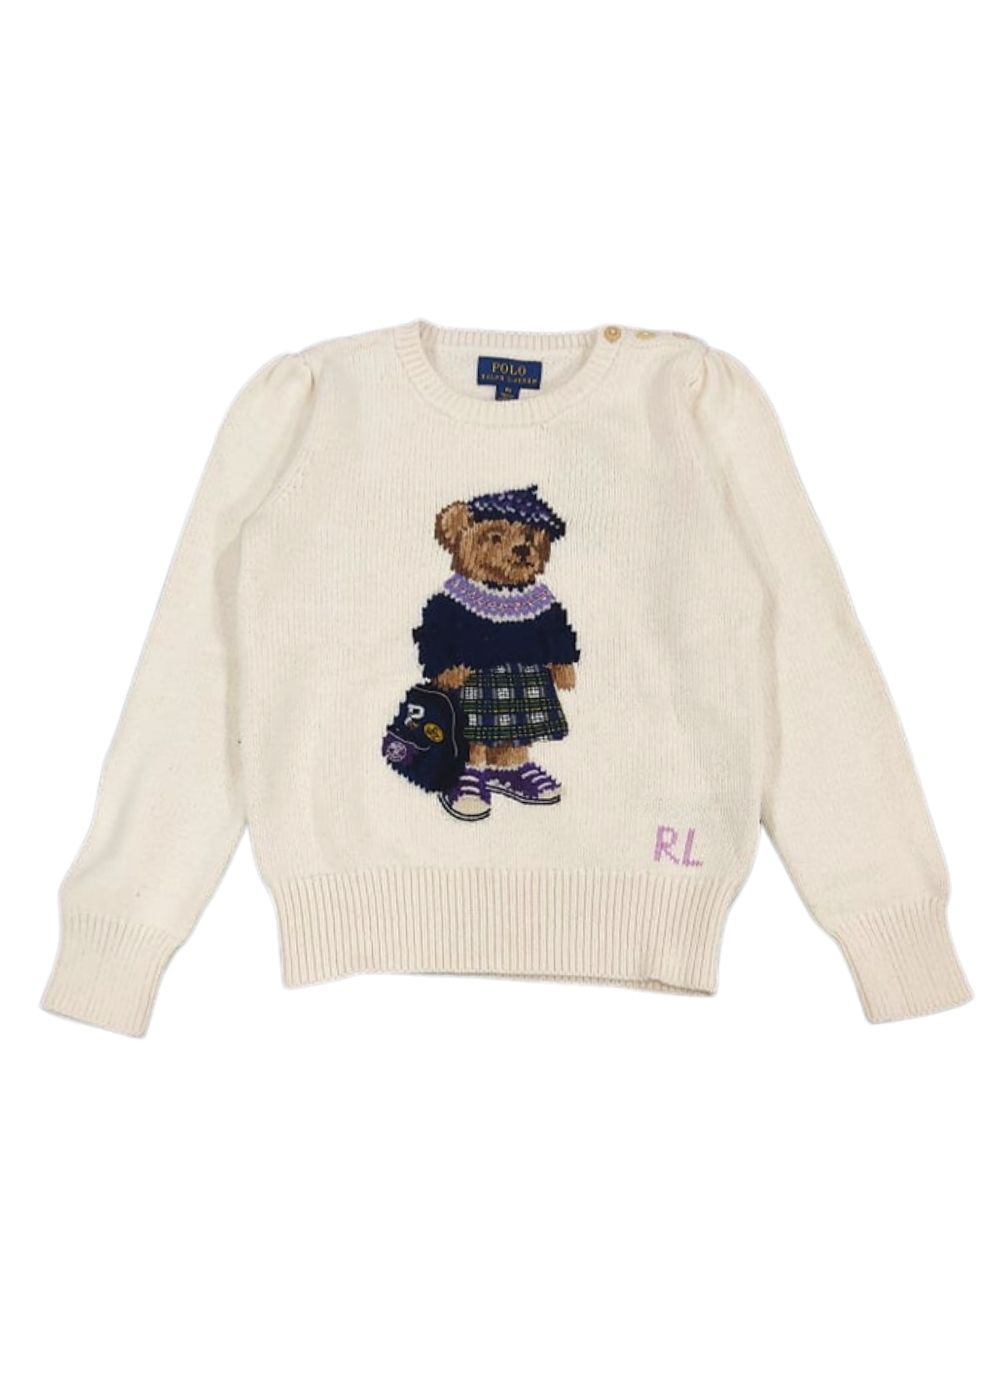 Featured image for “POLO RALPH LAUREN MAGLIONE BEAR”